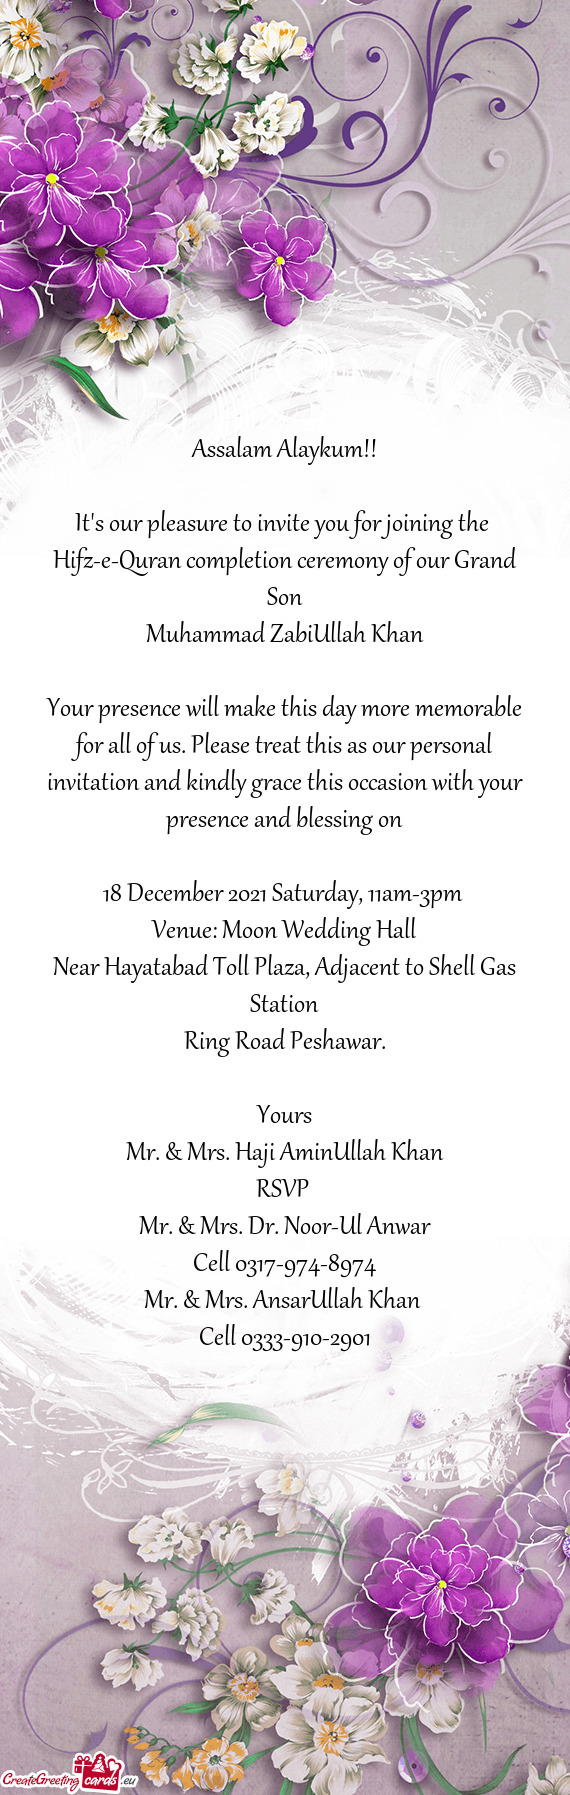 Your presence will make this day more memorable for all of us. Please treat this as our personal inv